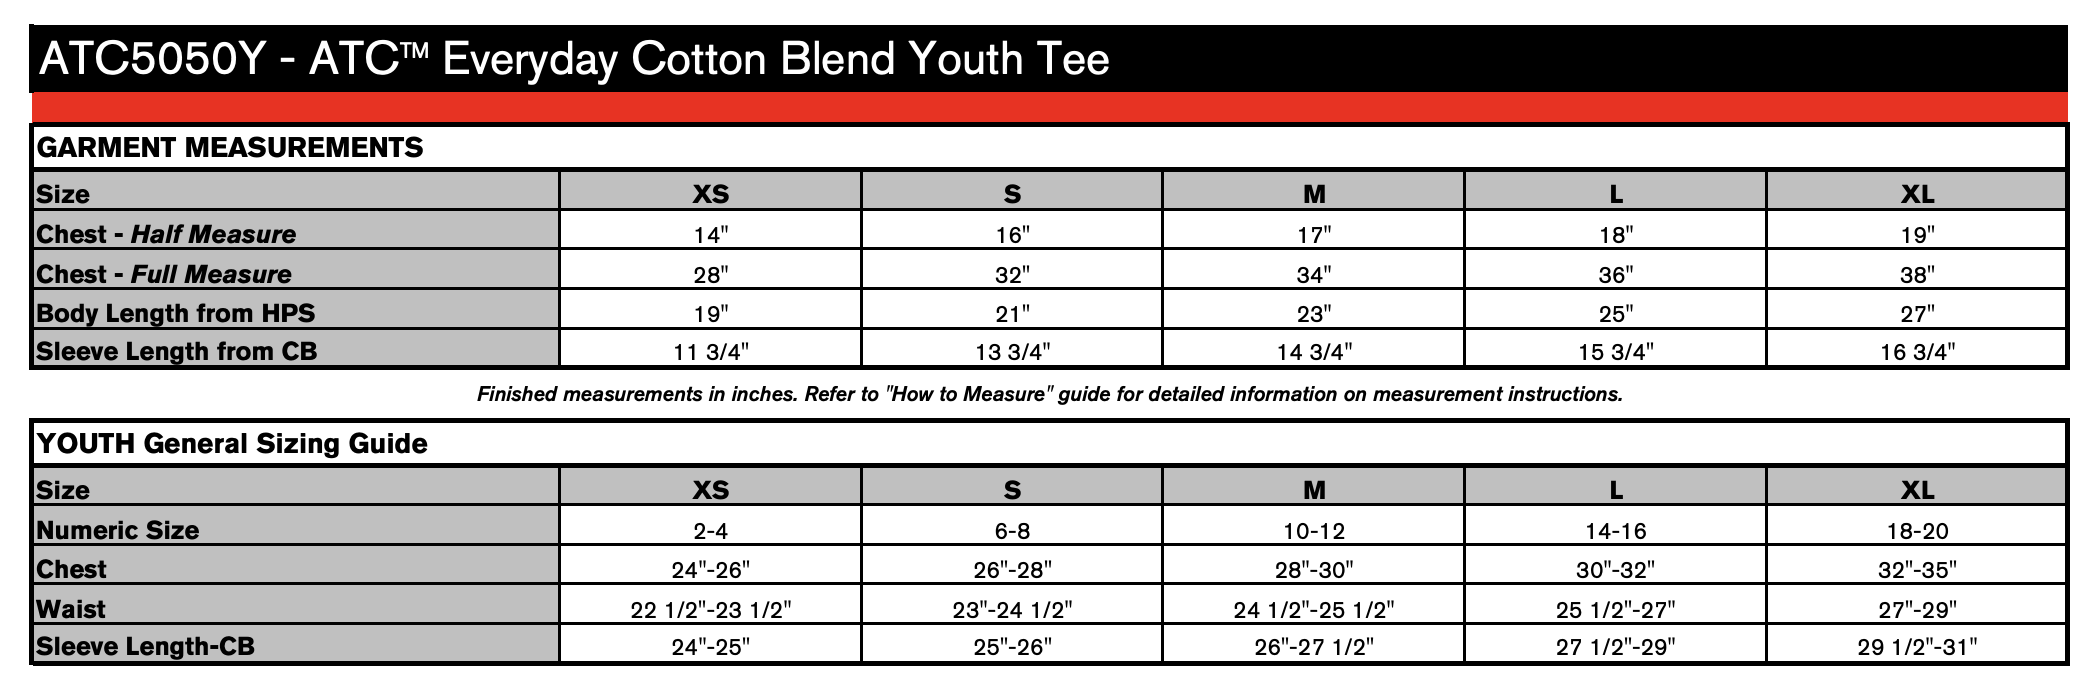 Everyday Cotton Blend Youth Tee size chart